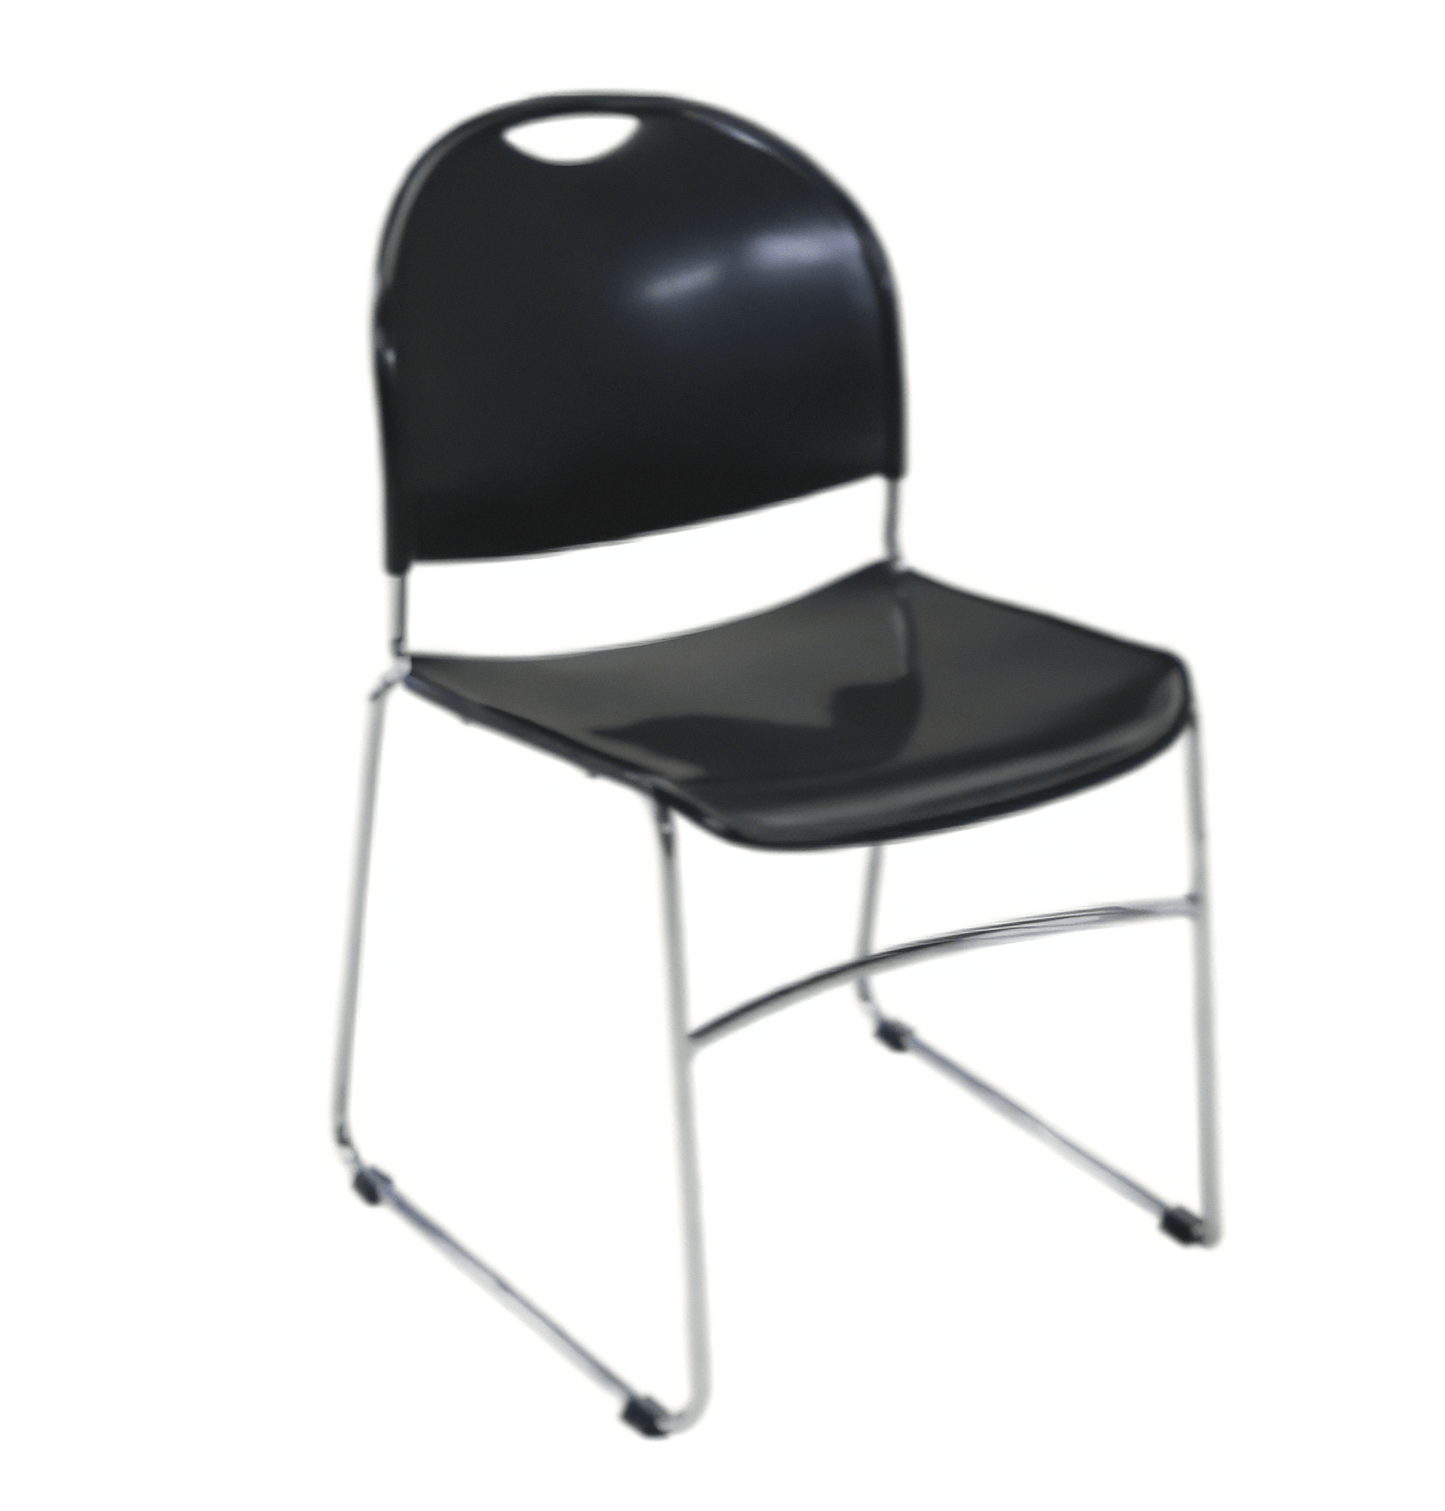 AmTab Stackable Caf Chair - 19.5"W x 20.75"L x 31"H - Seat Height 17"H (AMT-STACKCAFECHAIR-3) - SchoolOutlet